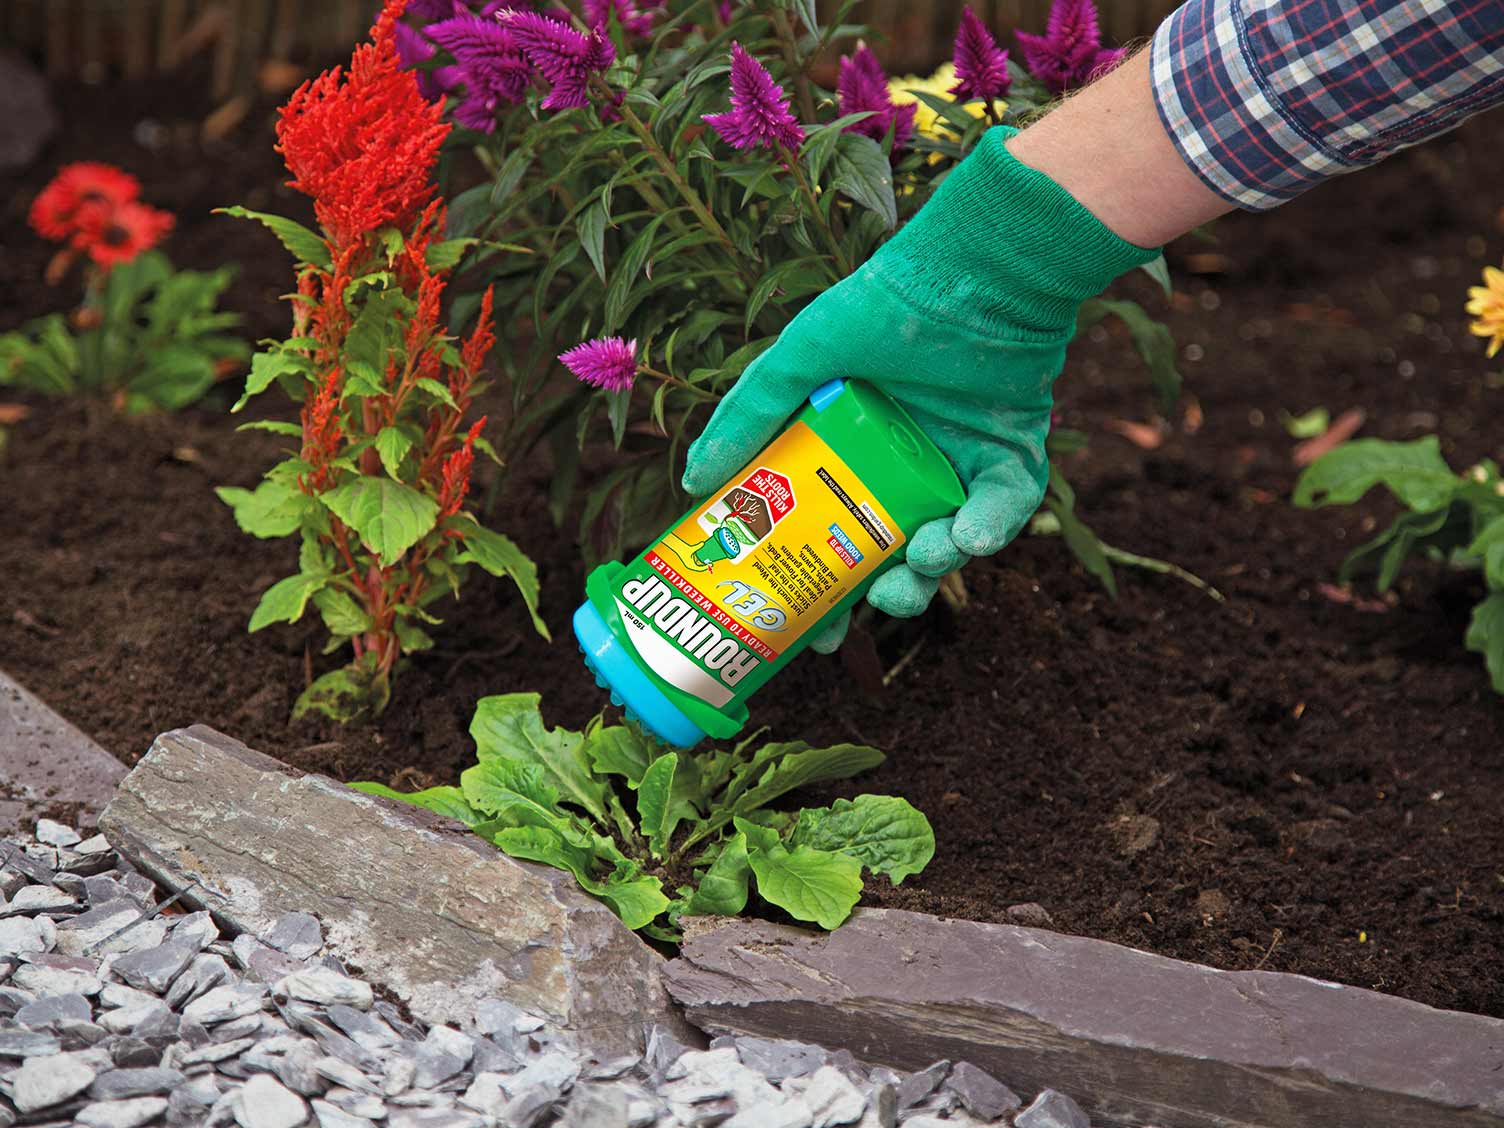 How to stop weeds from growing in my flower bed